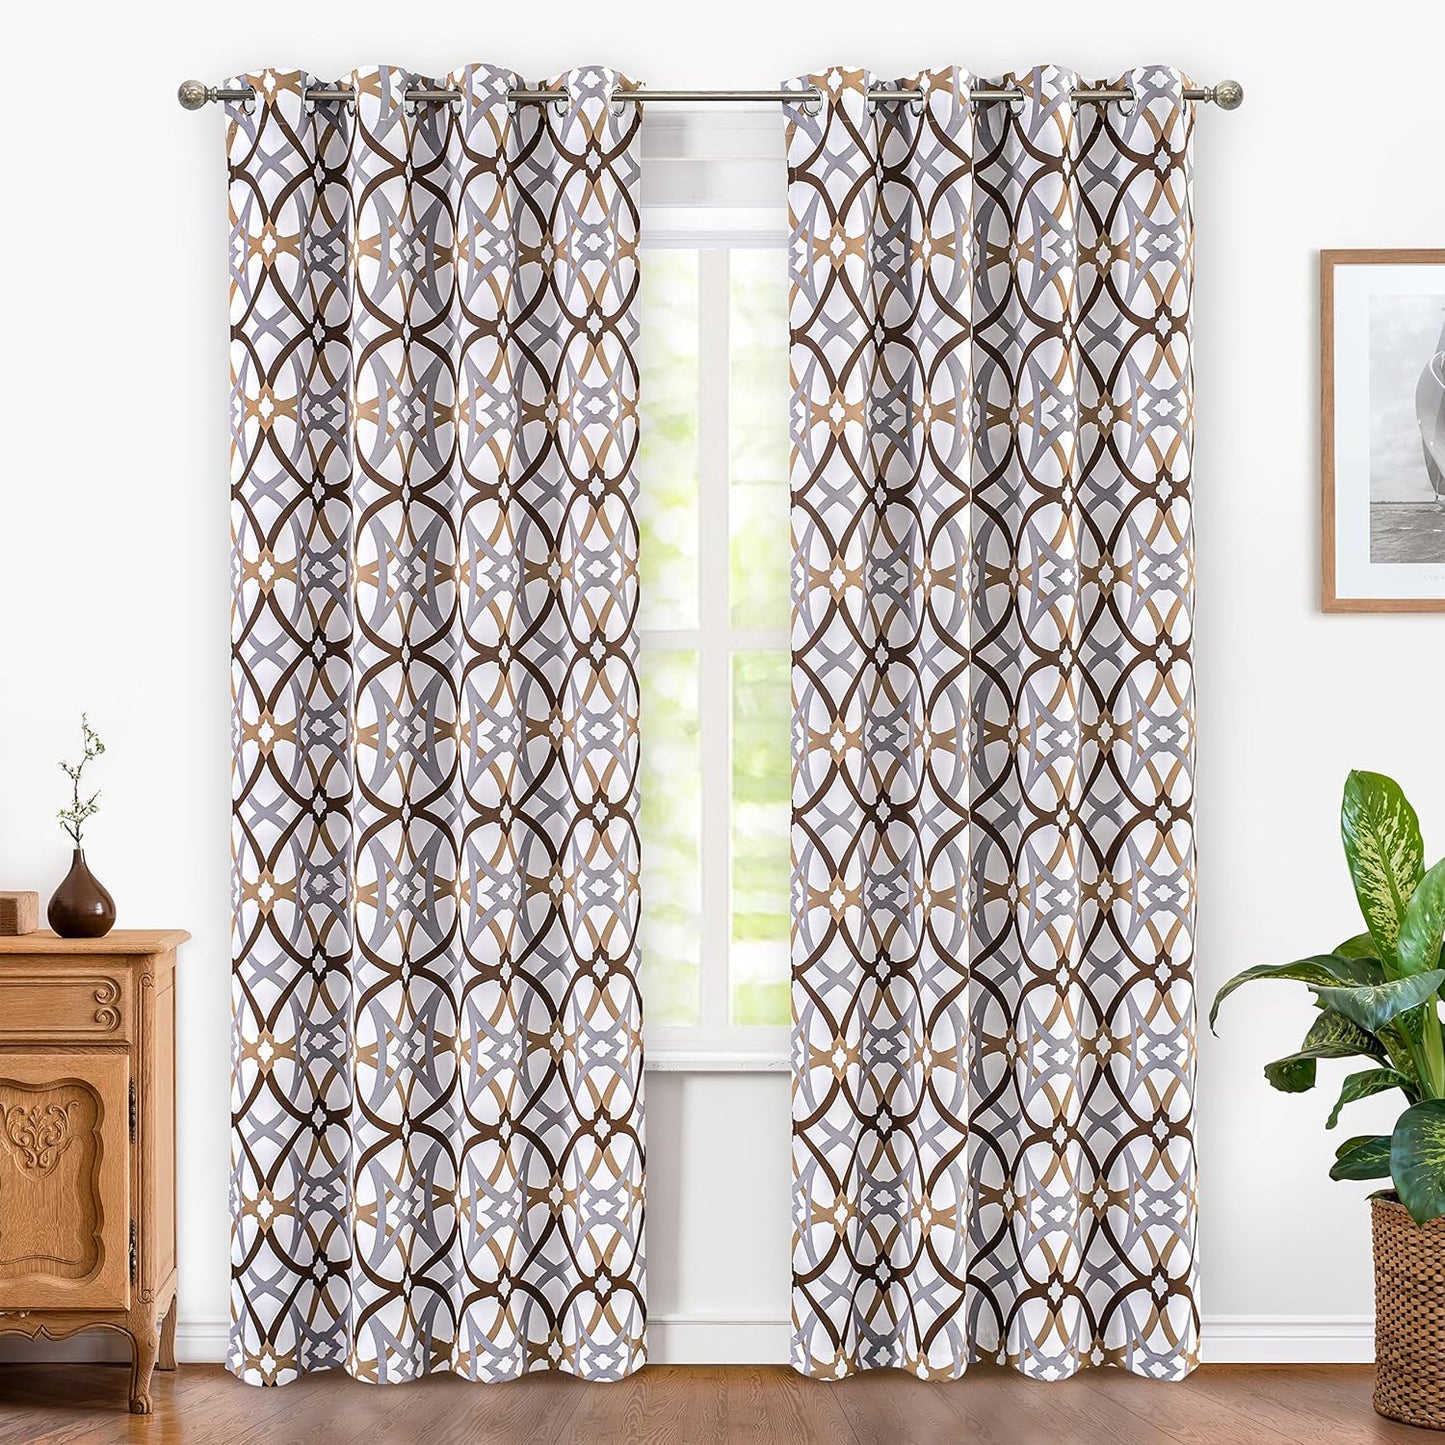 Driftaway Alexander Thermal Blackout Grommet Unlined Window Curtains Spiral Geo Trellis Pattern Set of 2 Panels Each Size 52 Inch by 84 Inch Red and Gray  DriftAway Brown 52"X96" 